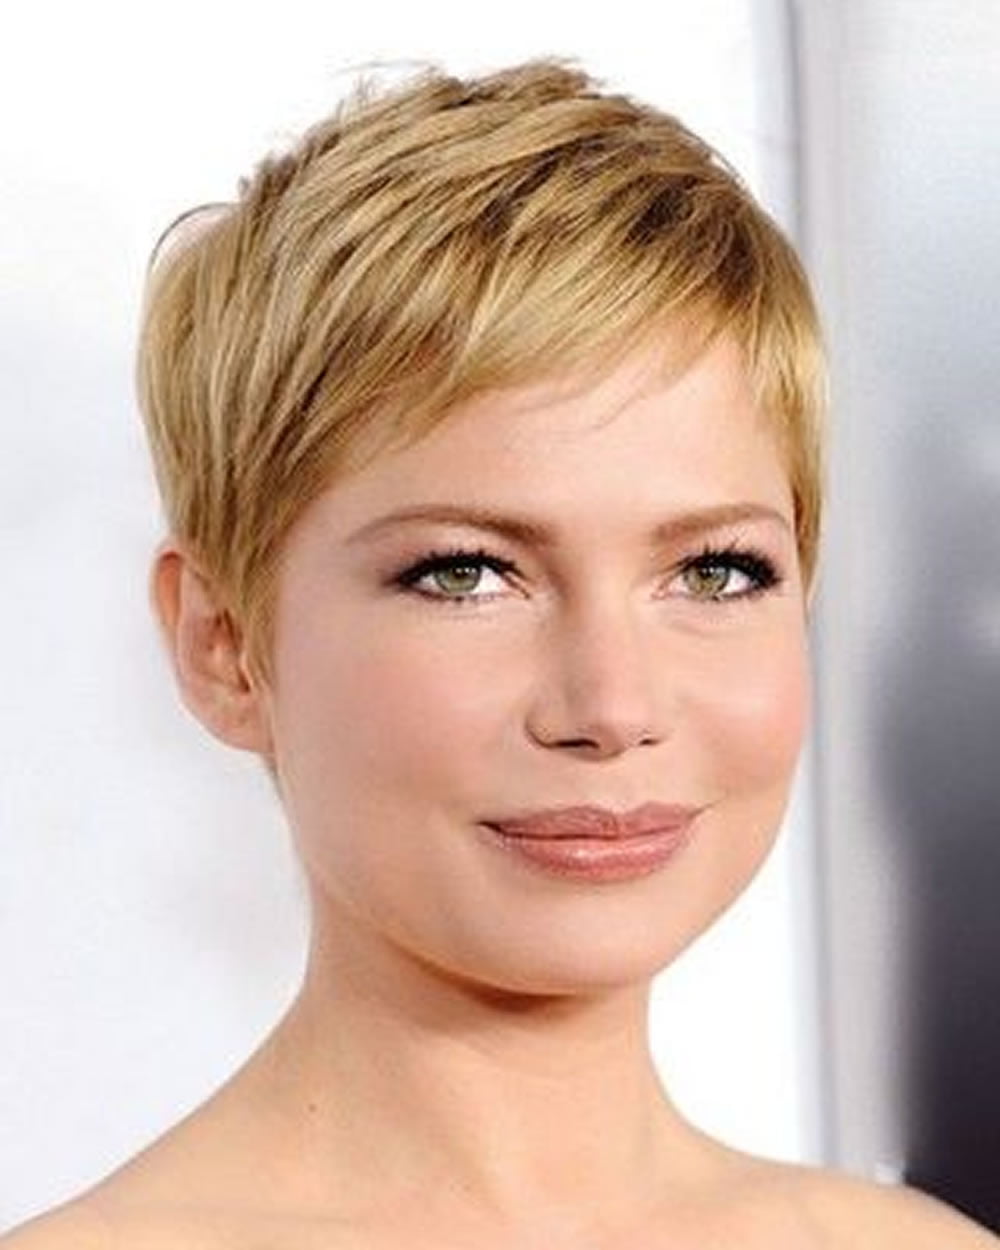 Super Very Short Pixie Haircuts & Hair Colors for 2018 ...